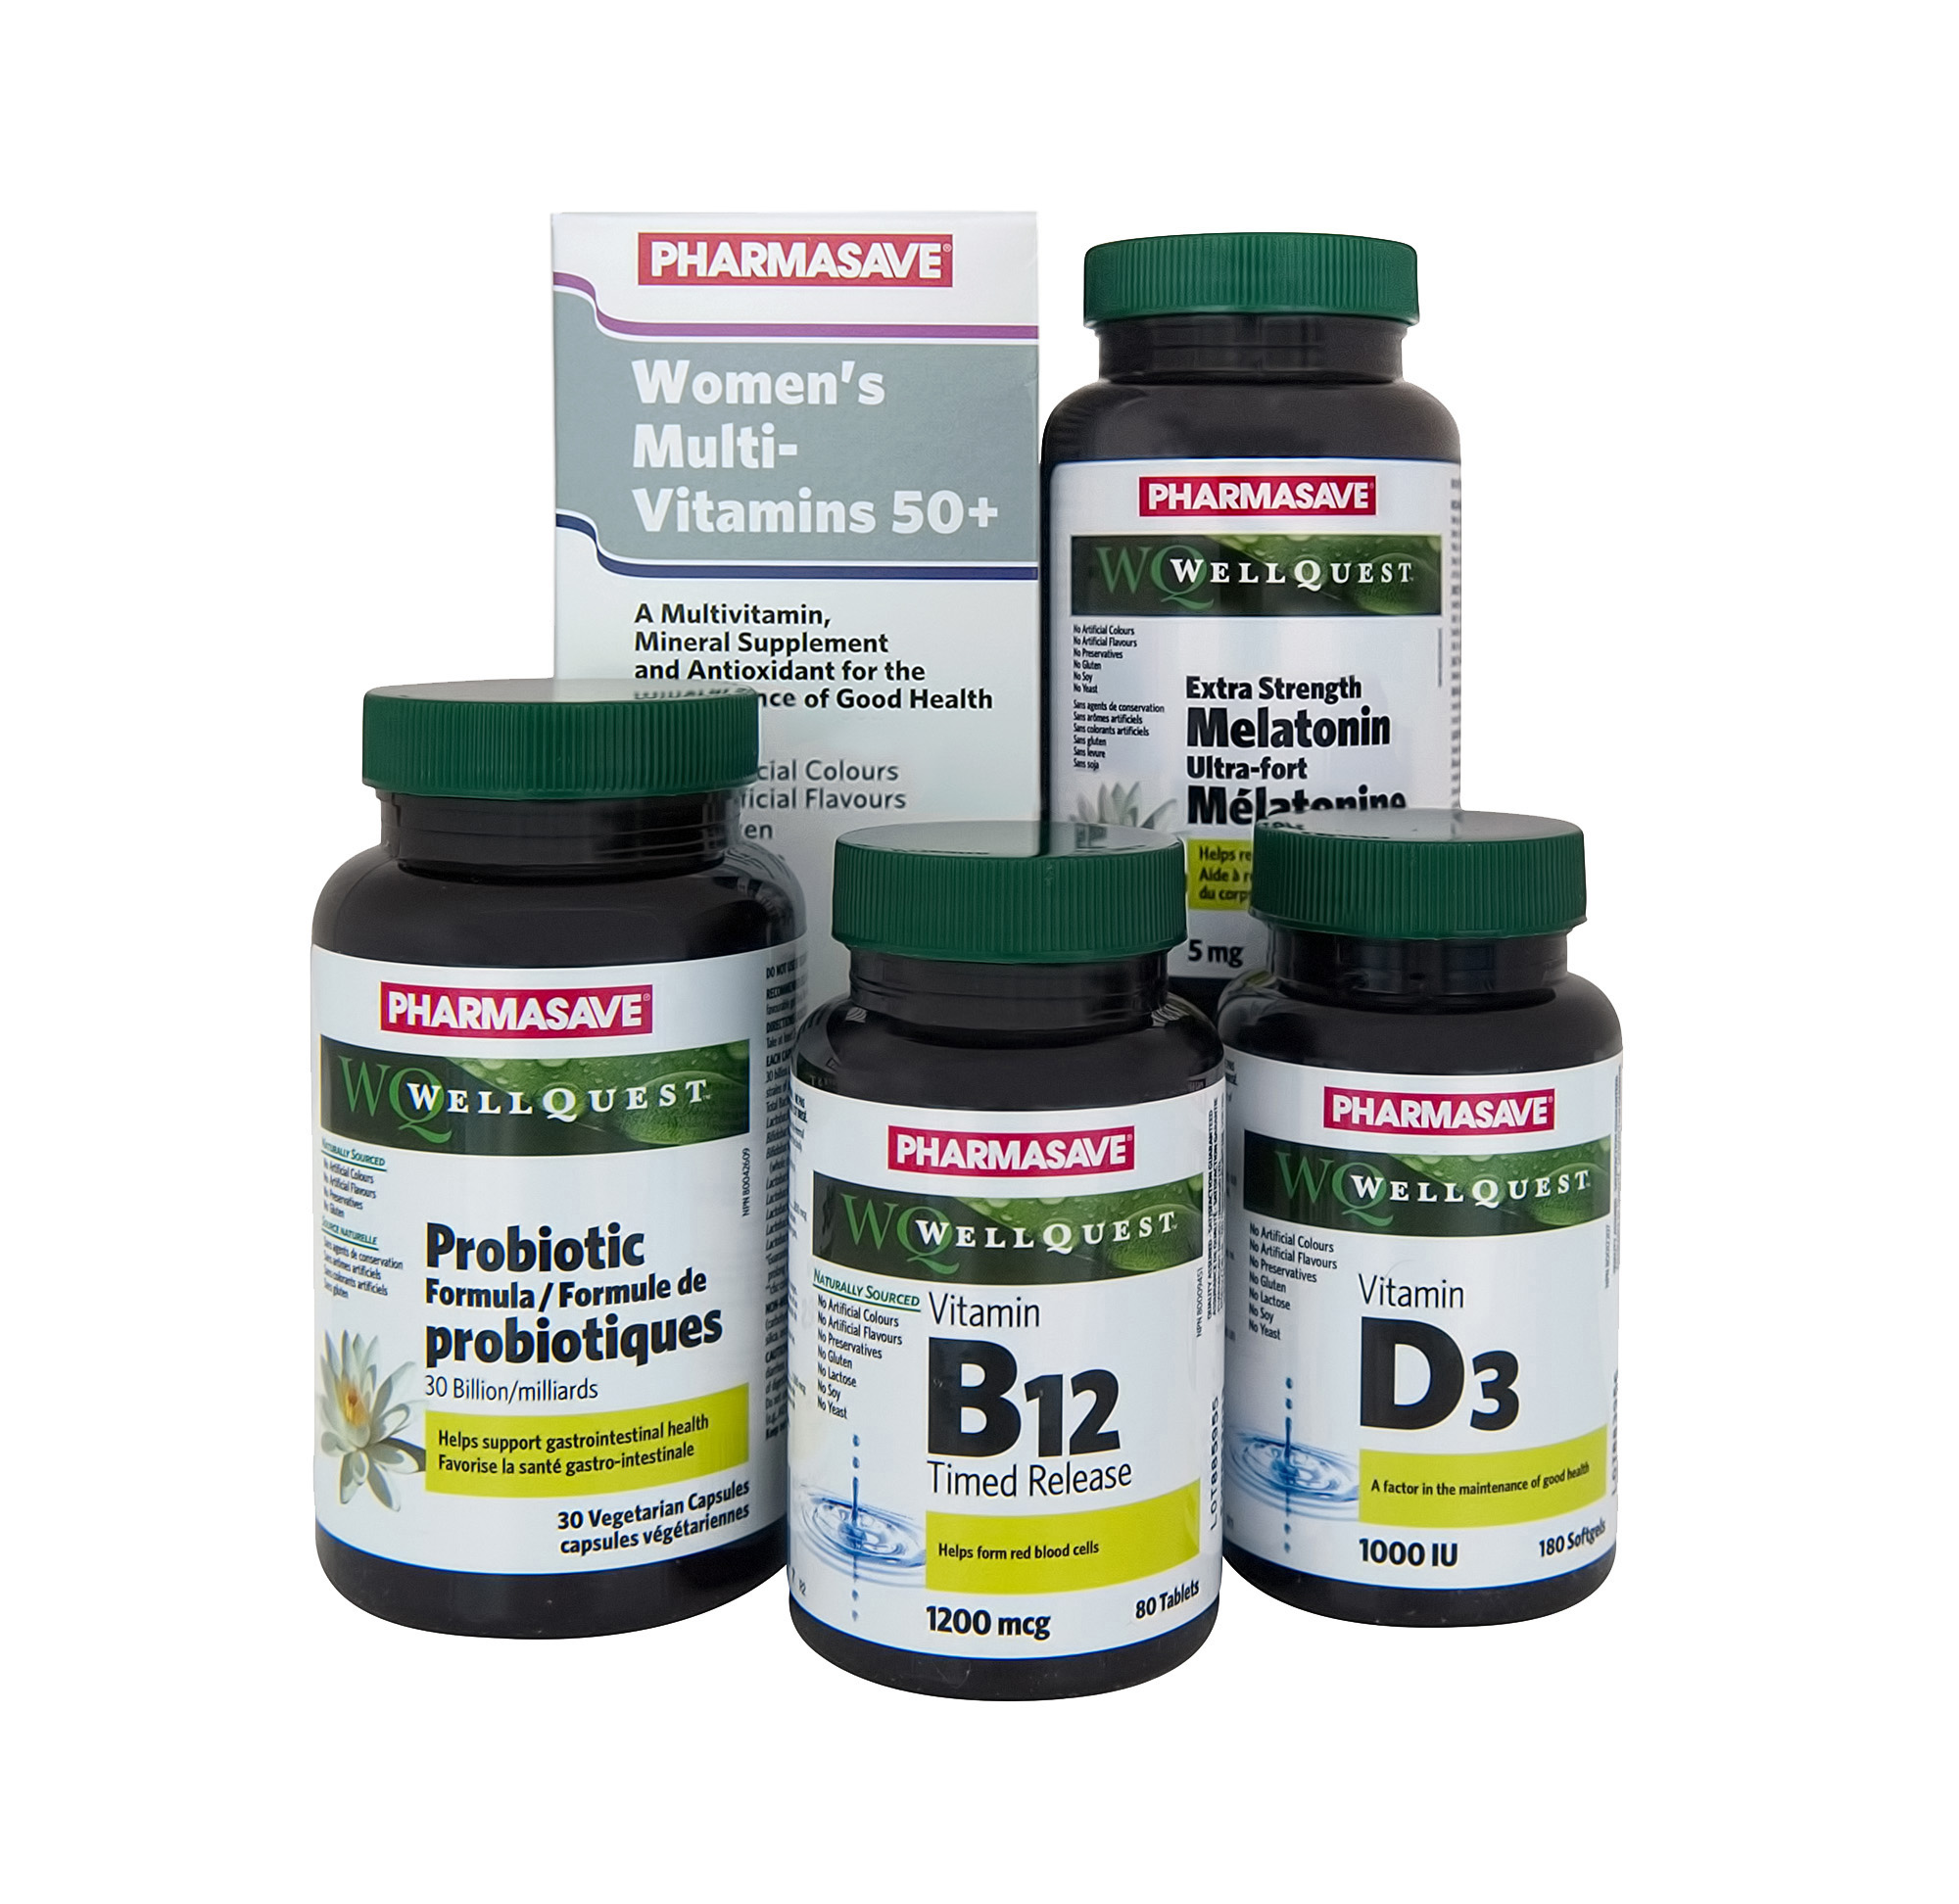 Pharmasave Brand vitamins, minerals and supplements.